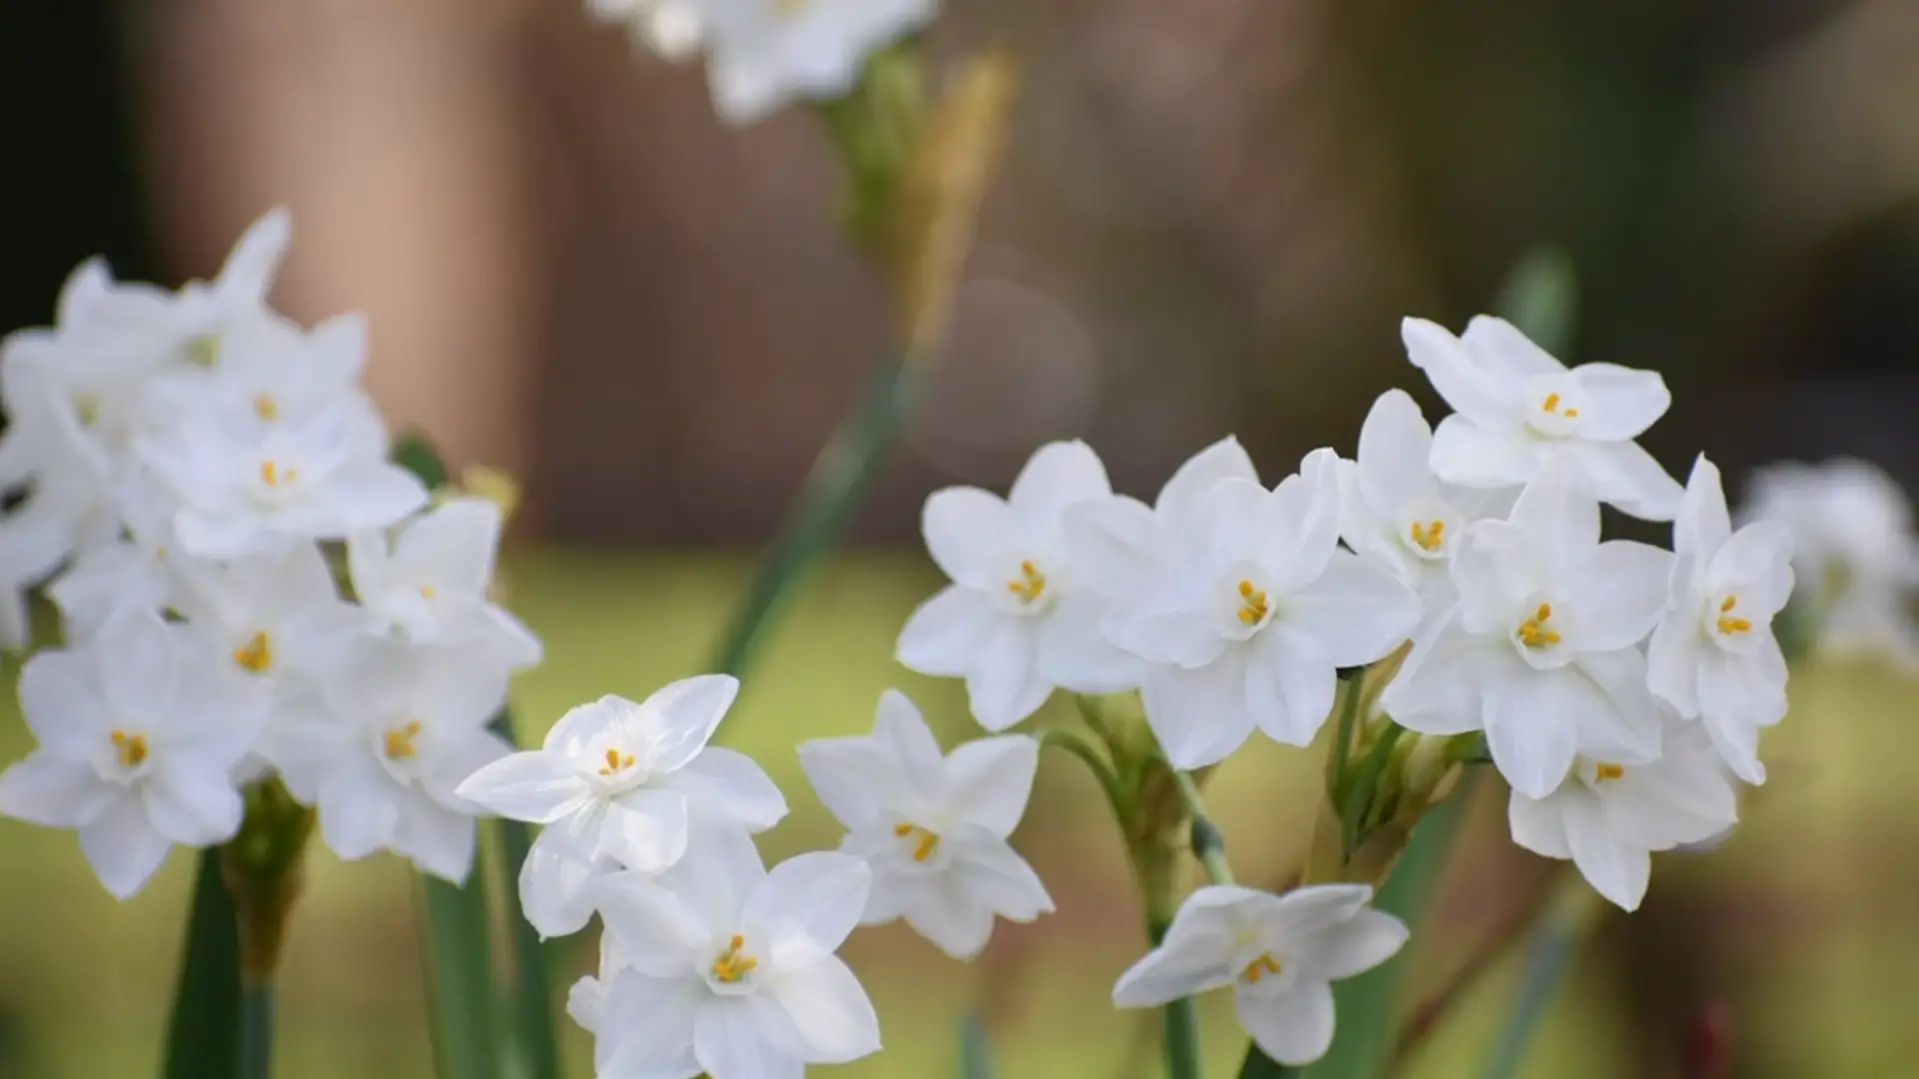 Caring for Outdoor Paperwhites